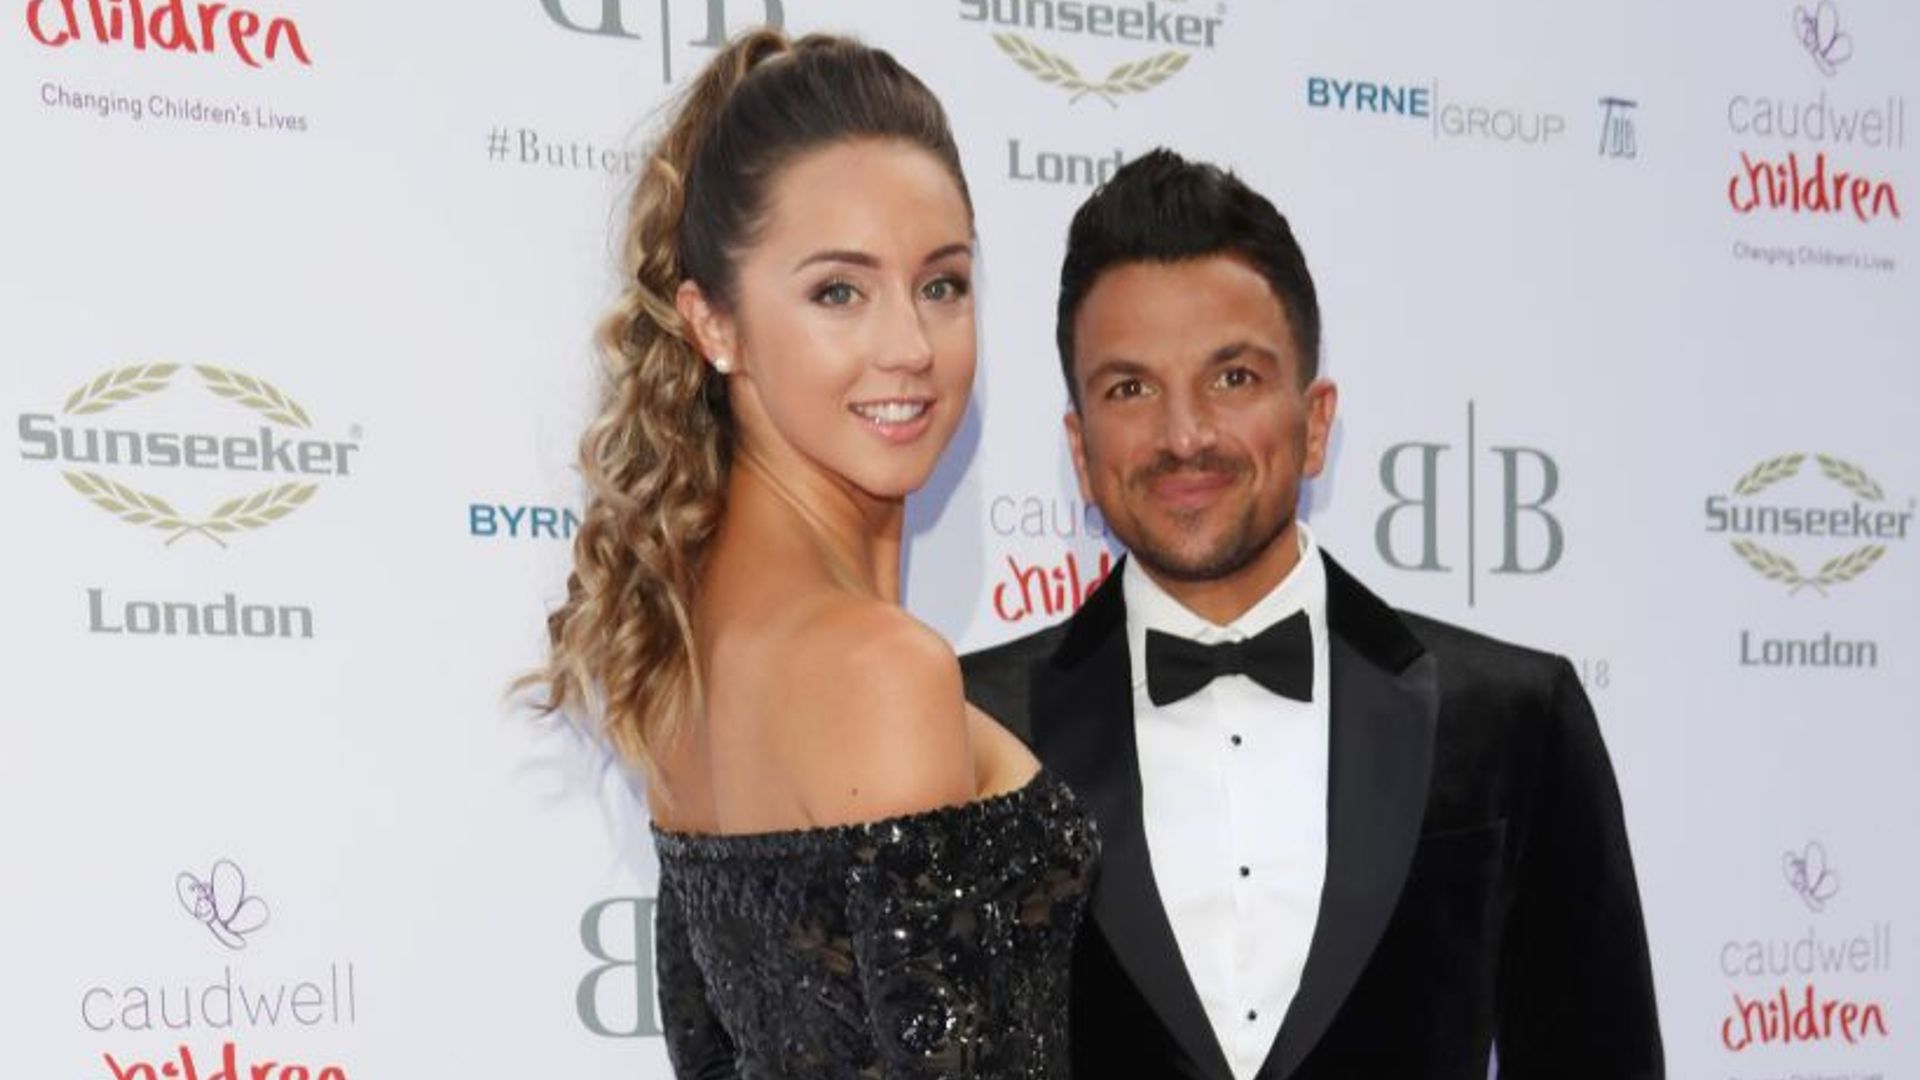 Peter Andre Emily McDonagh Butterfly Ball 1